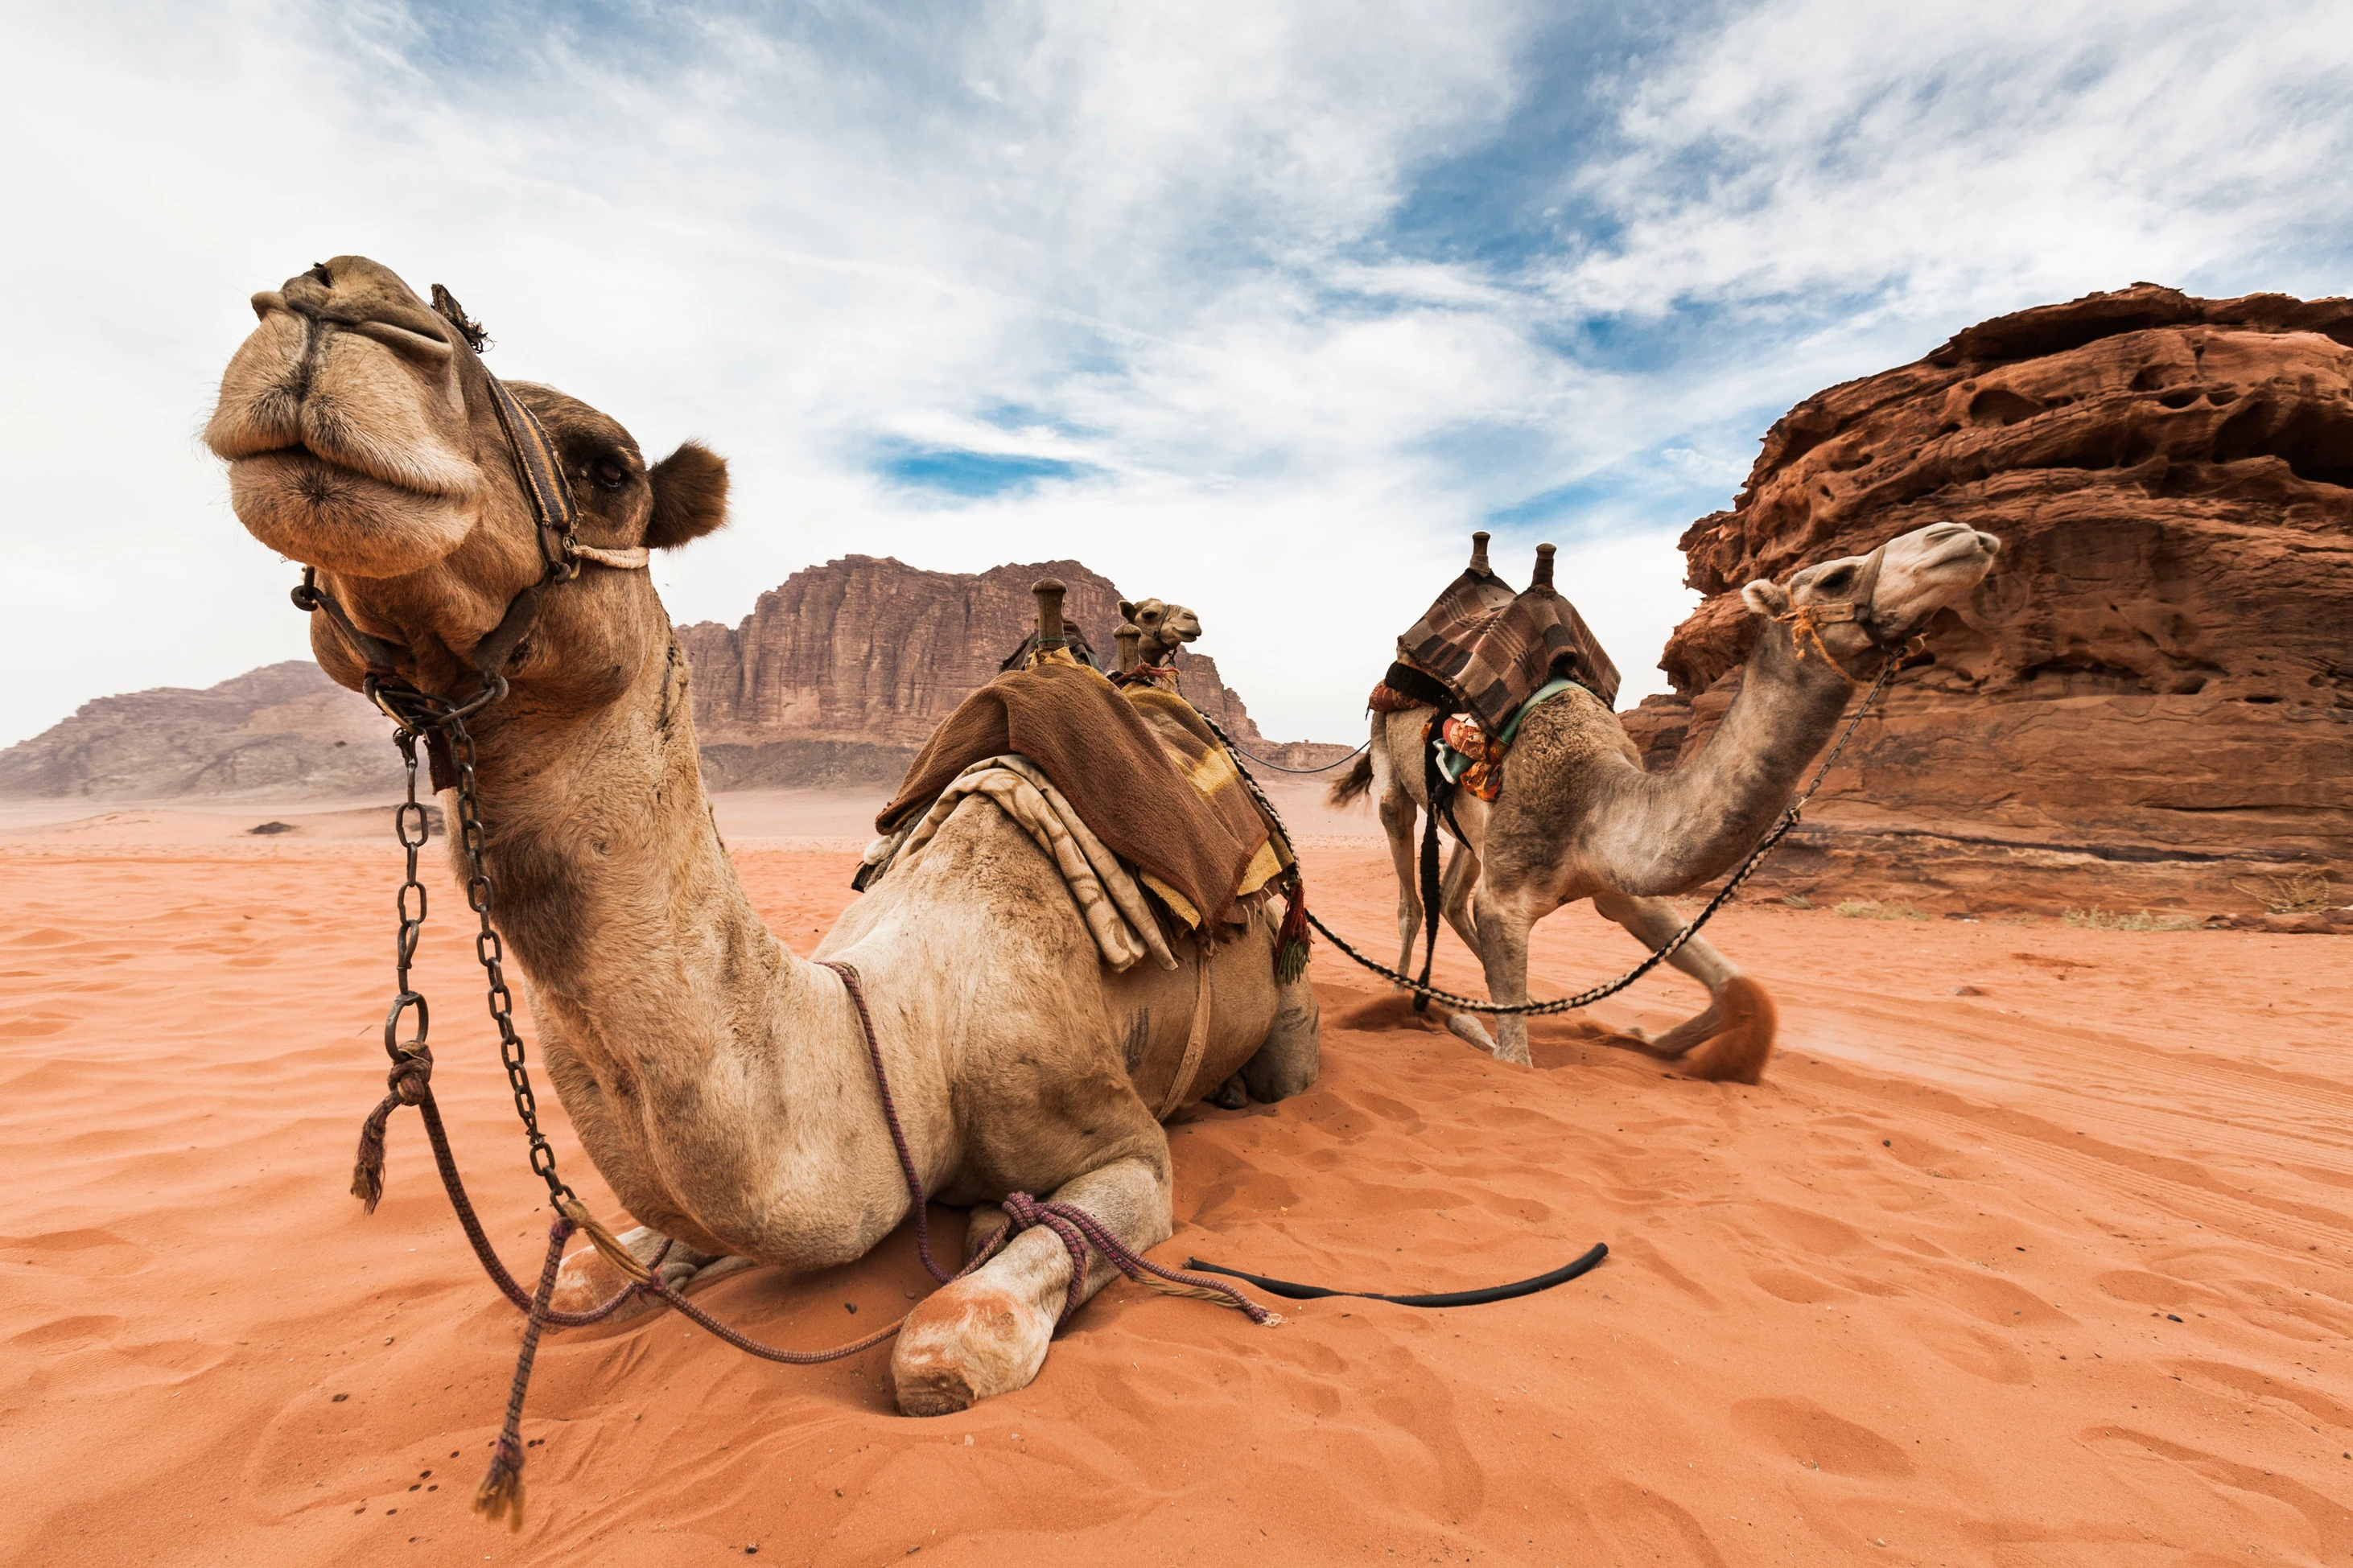 Private Transfer from Petra to Wadi Rum